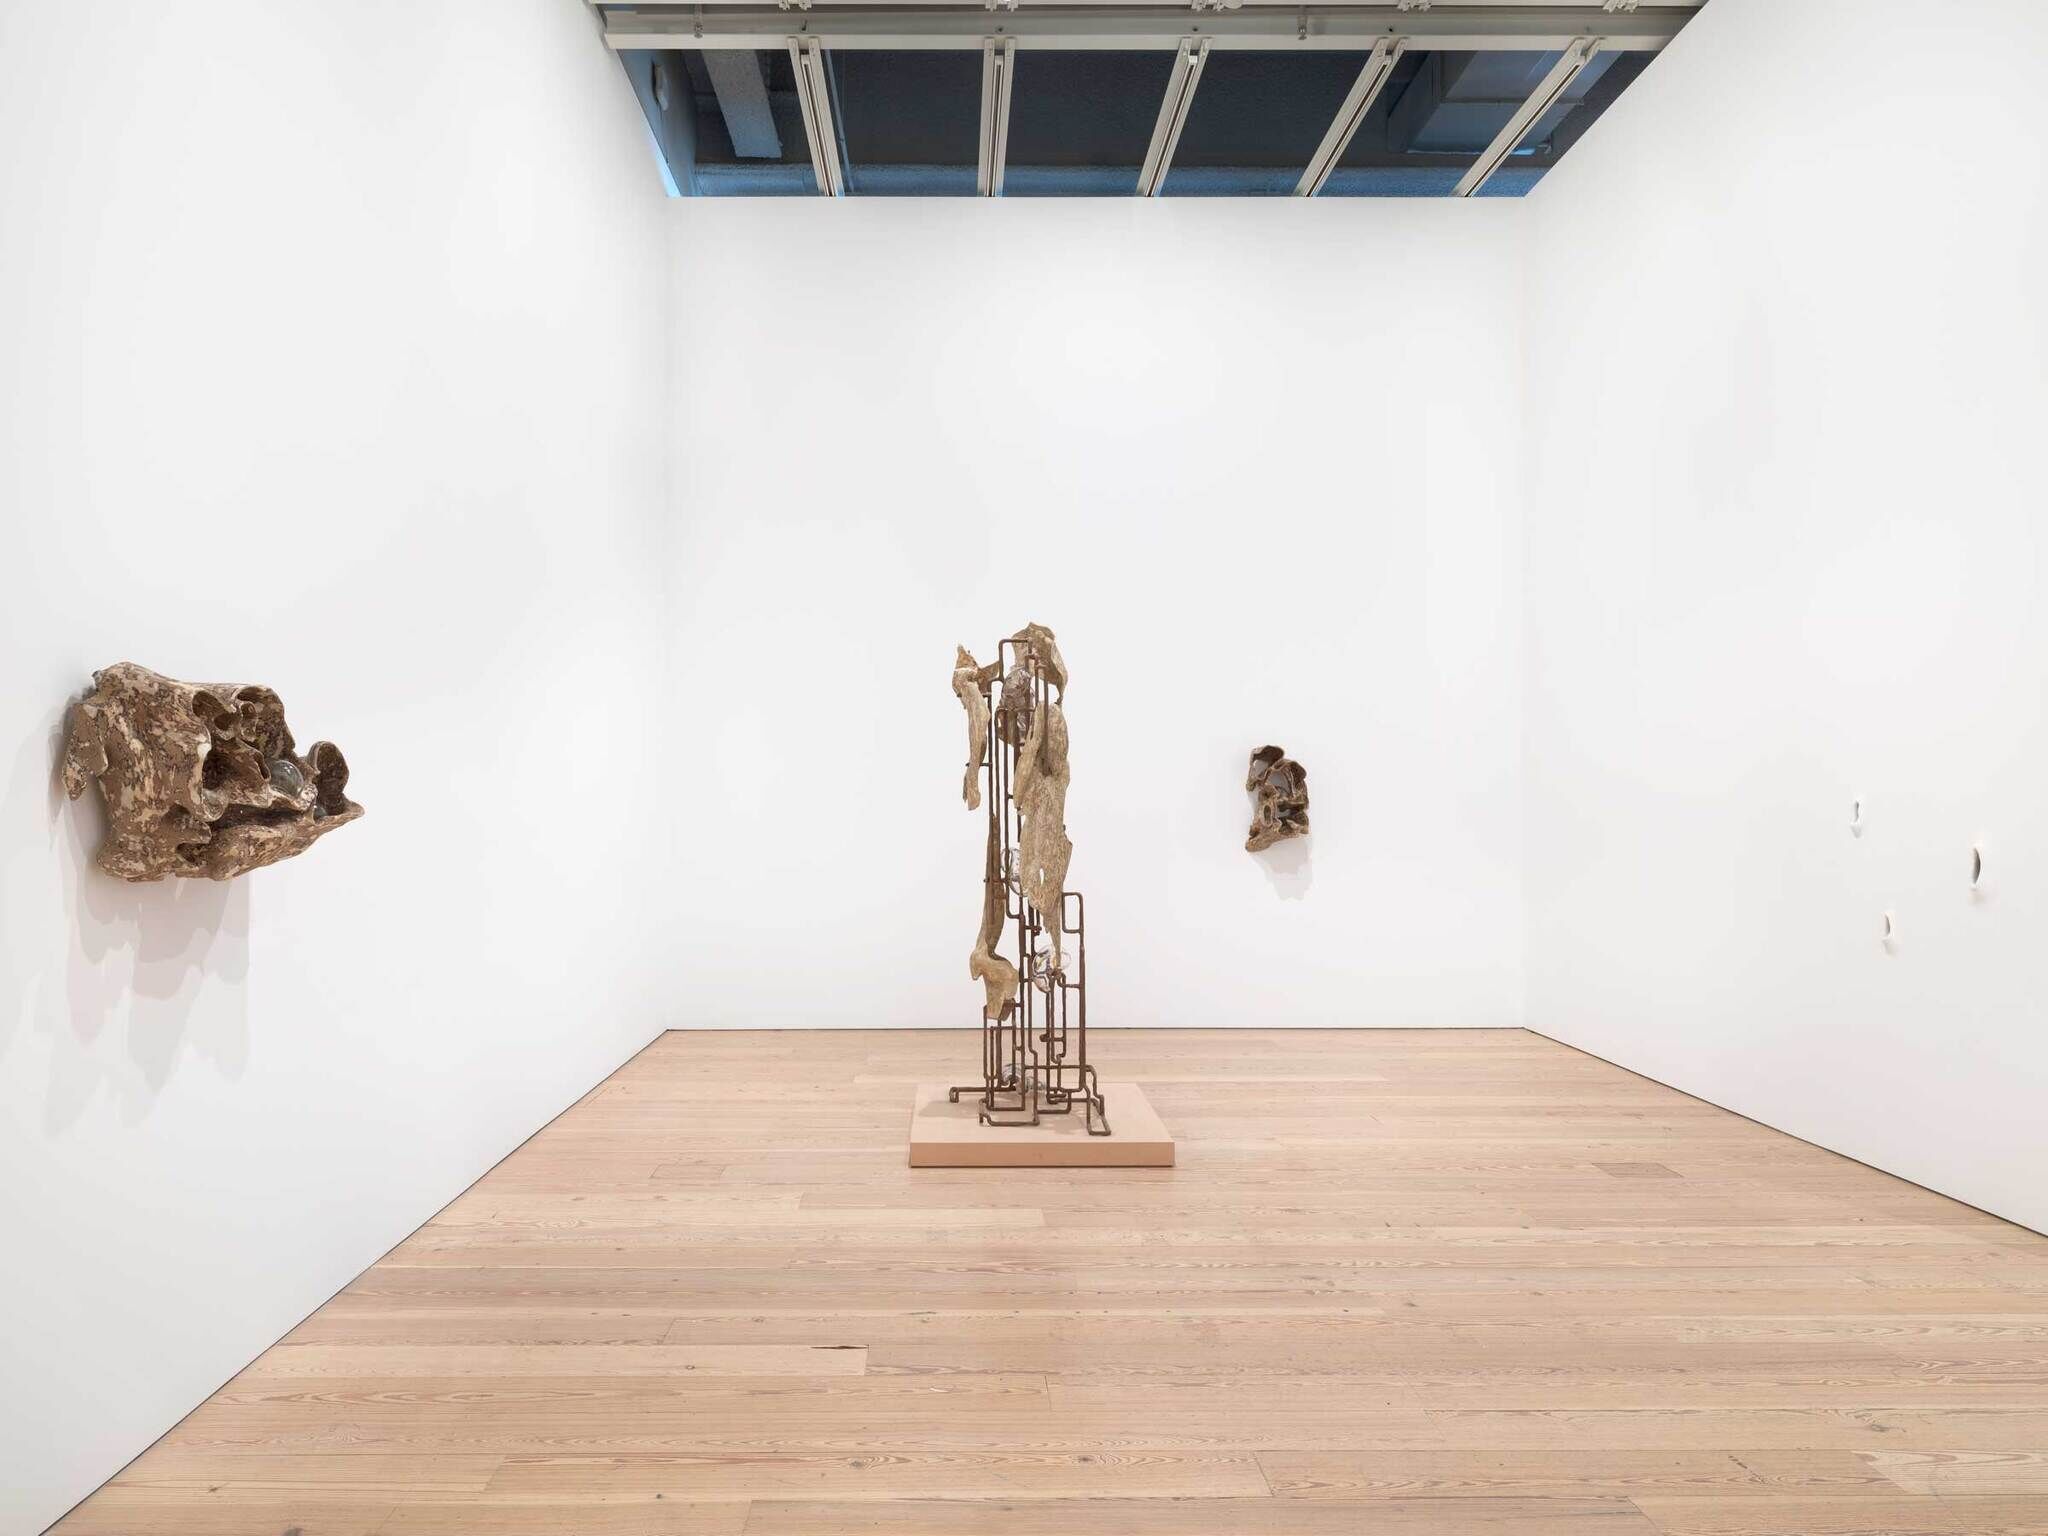 Modern art gallery interior with abstract sculptures on white walls and wooden flooring.